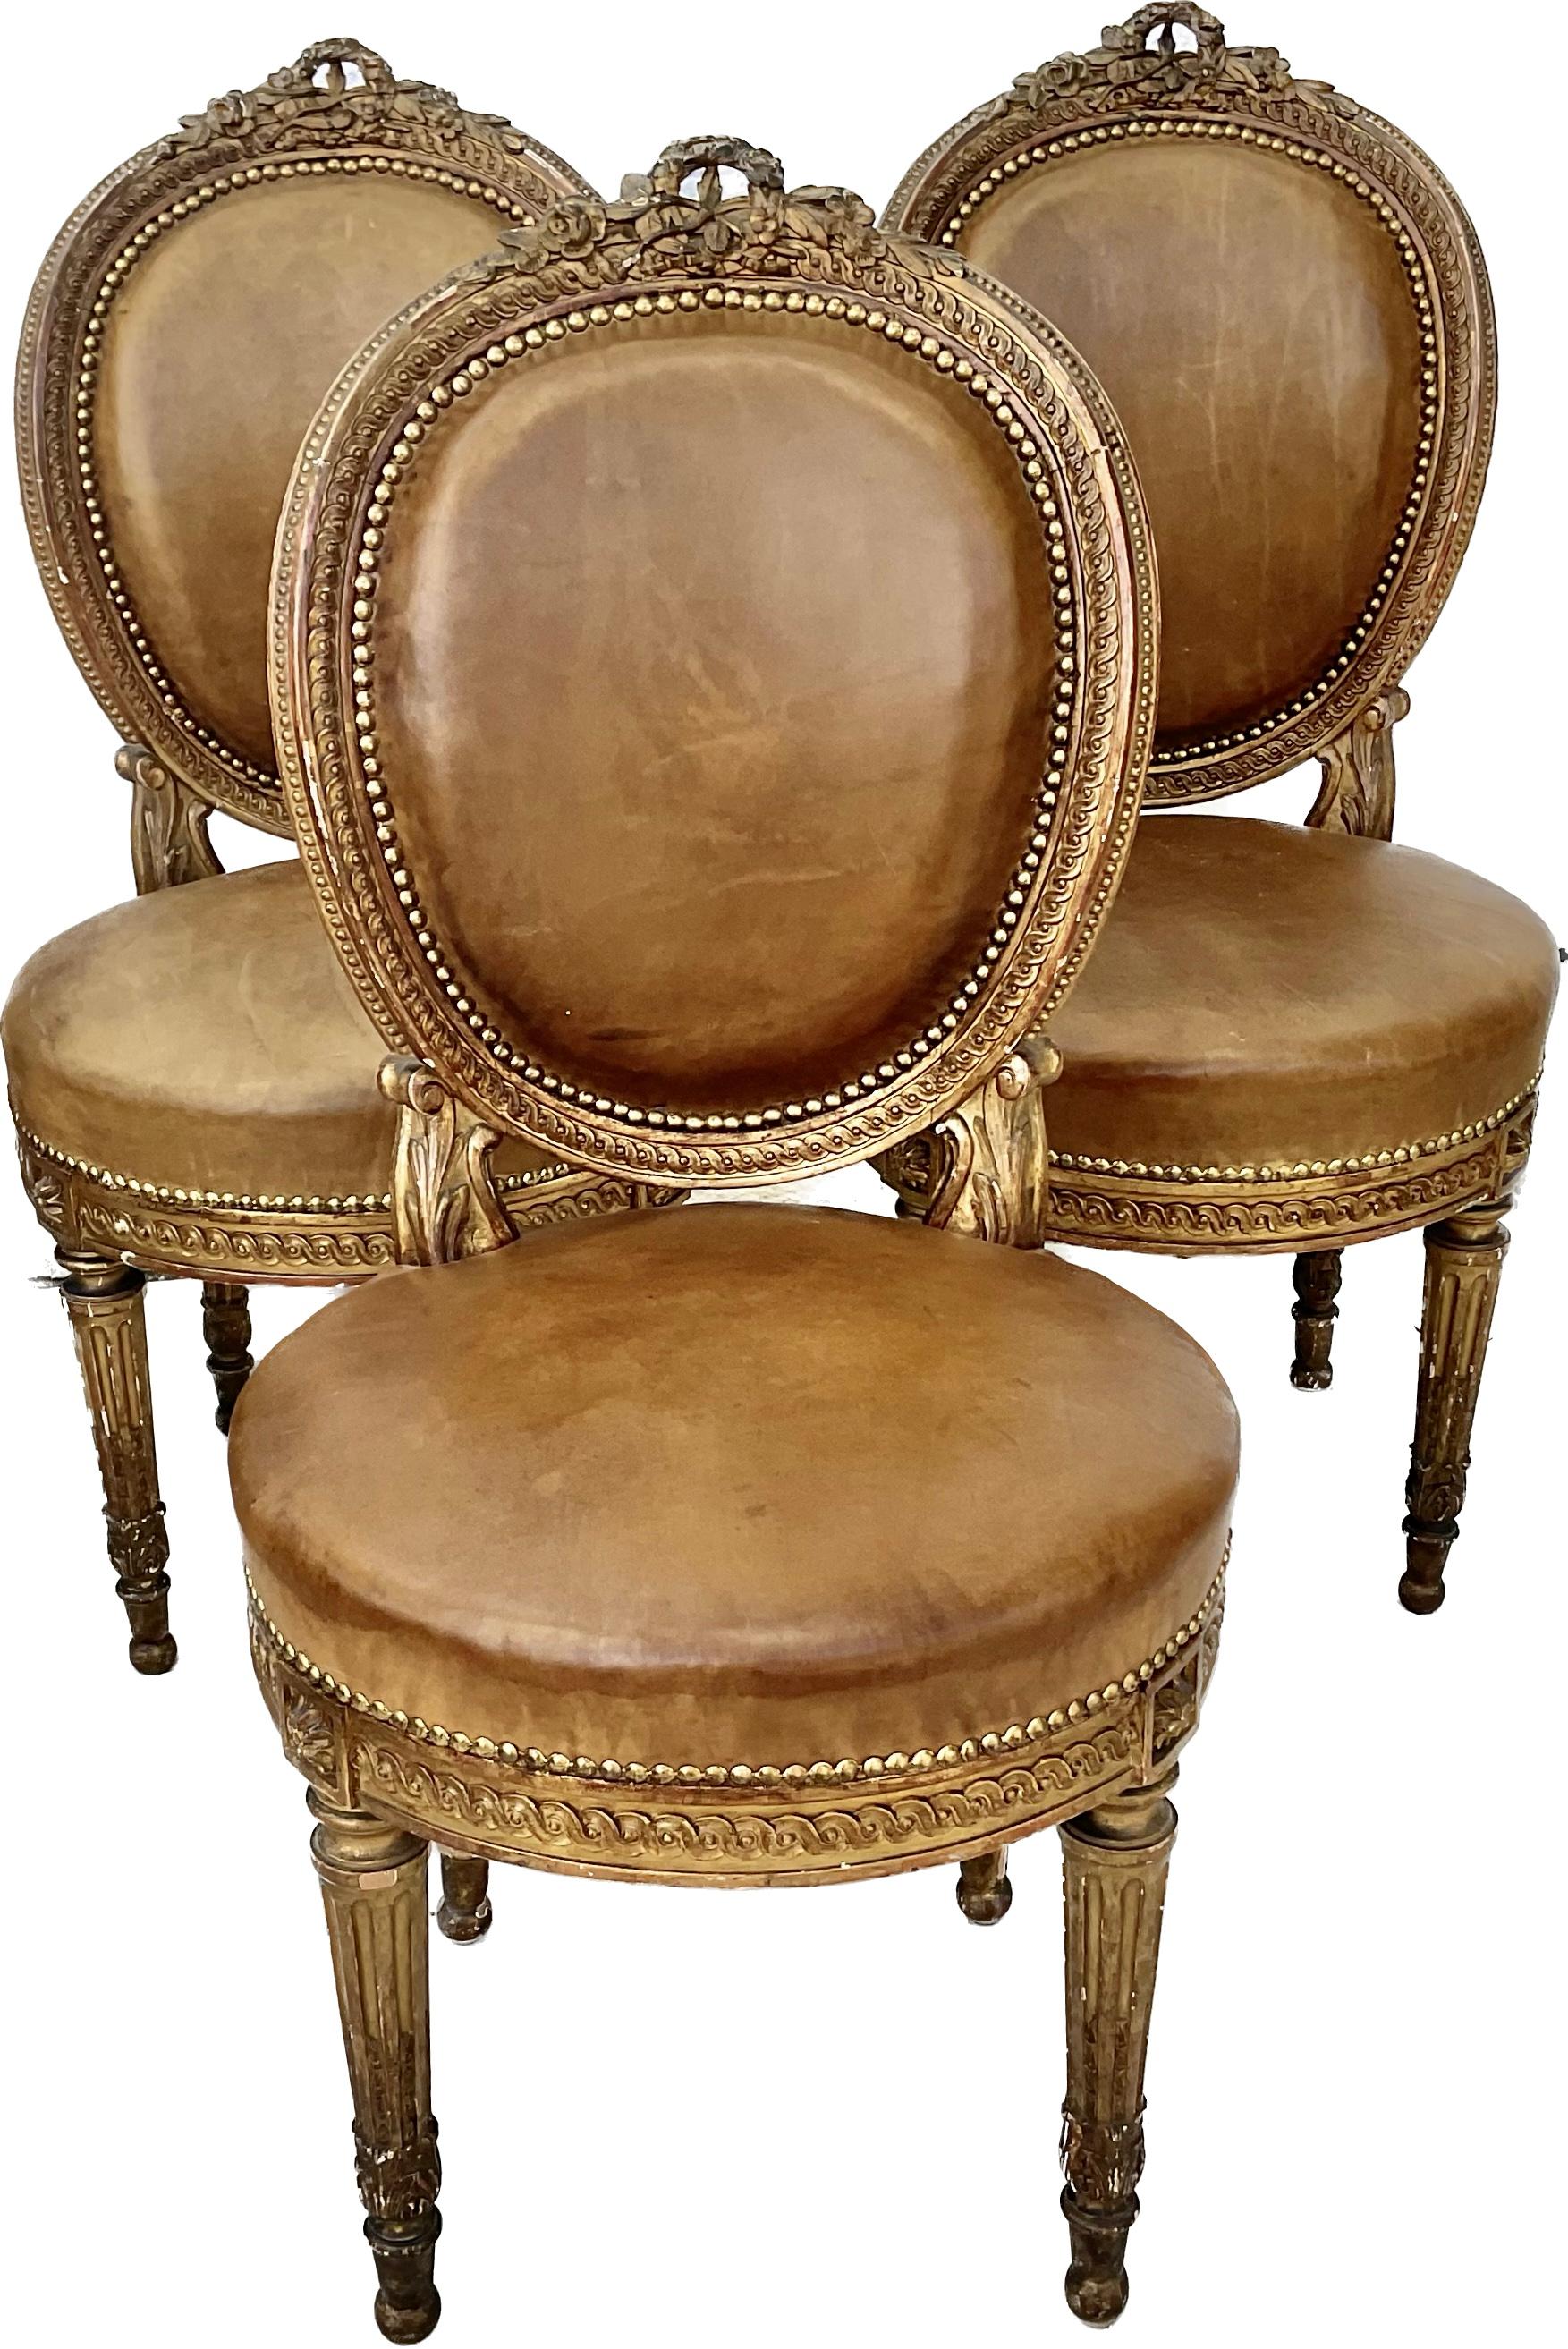 An antique French set of four Louis XVI style side chairs in giltwood finish. Stylish and elegant, perfect choice to provide timeless neoclassical styling with Fine dining comfort. The seatback frames, apron and legs feature Fine carved and molded